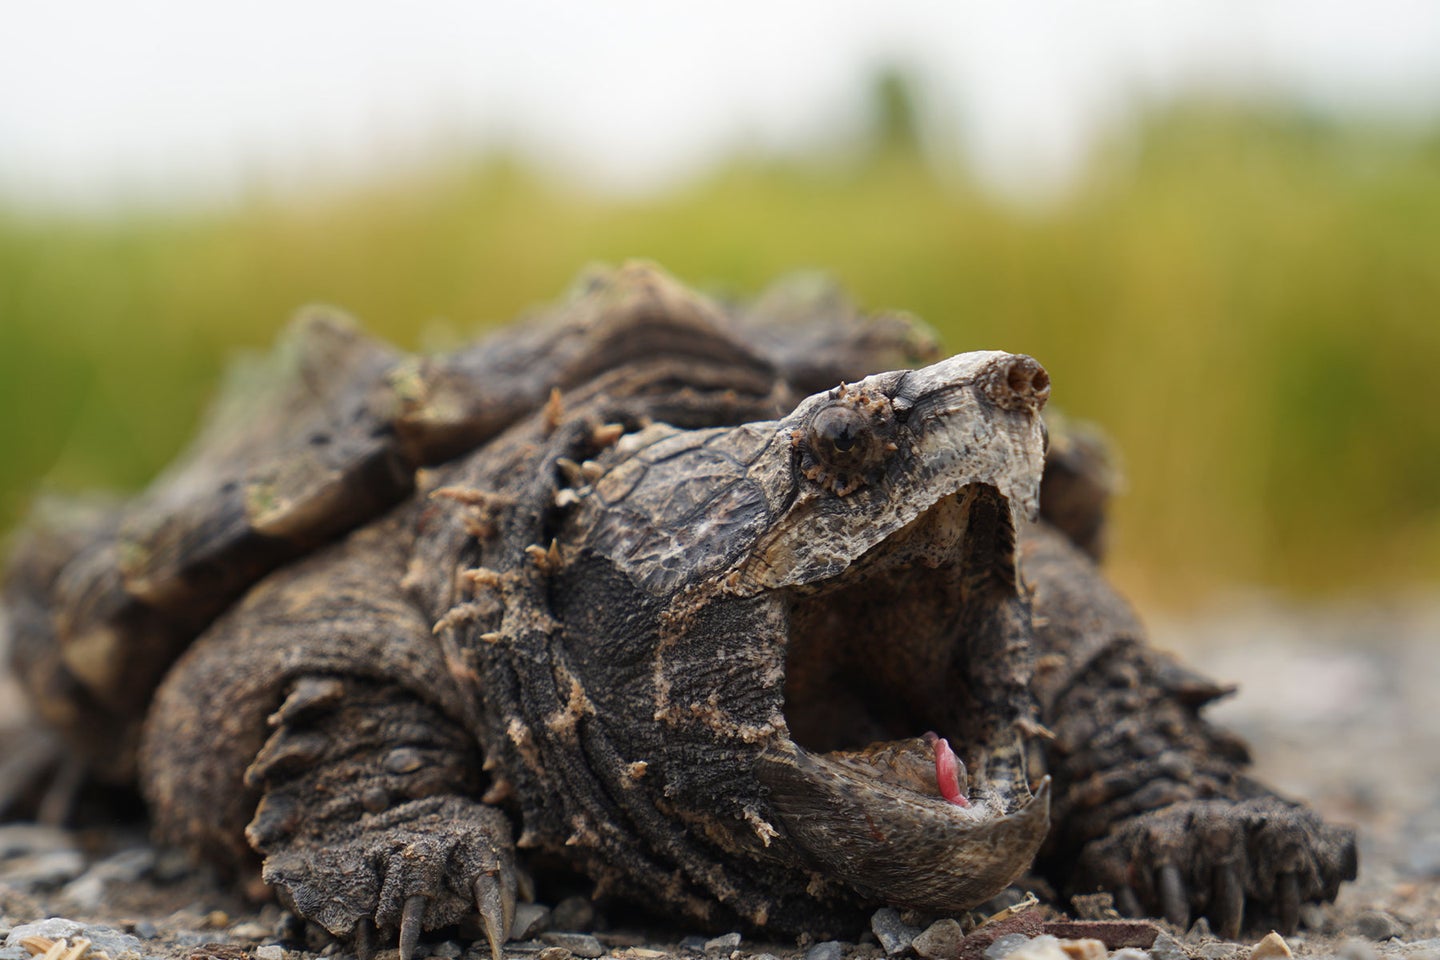 An alligator snapping turtle bears its sizable jaws while laying on dry ground.